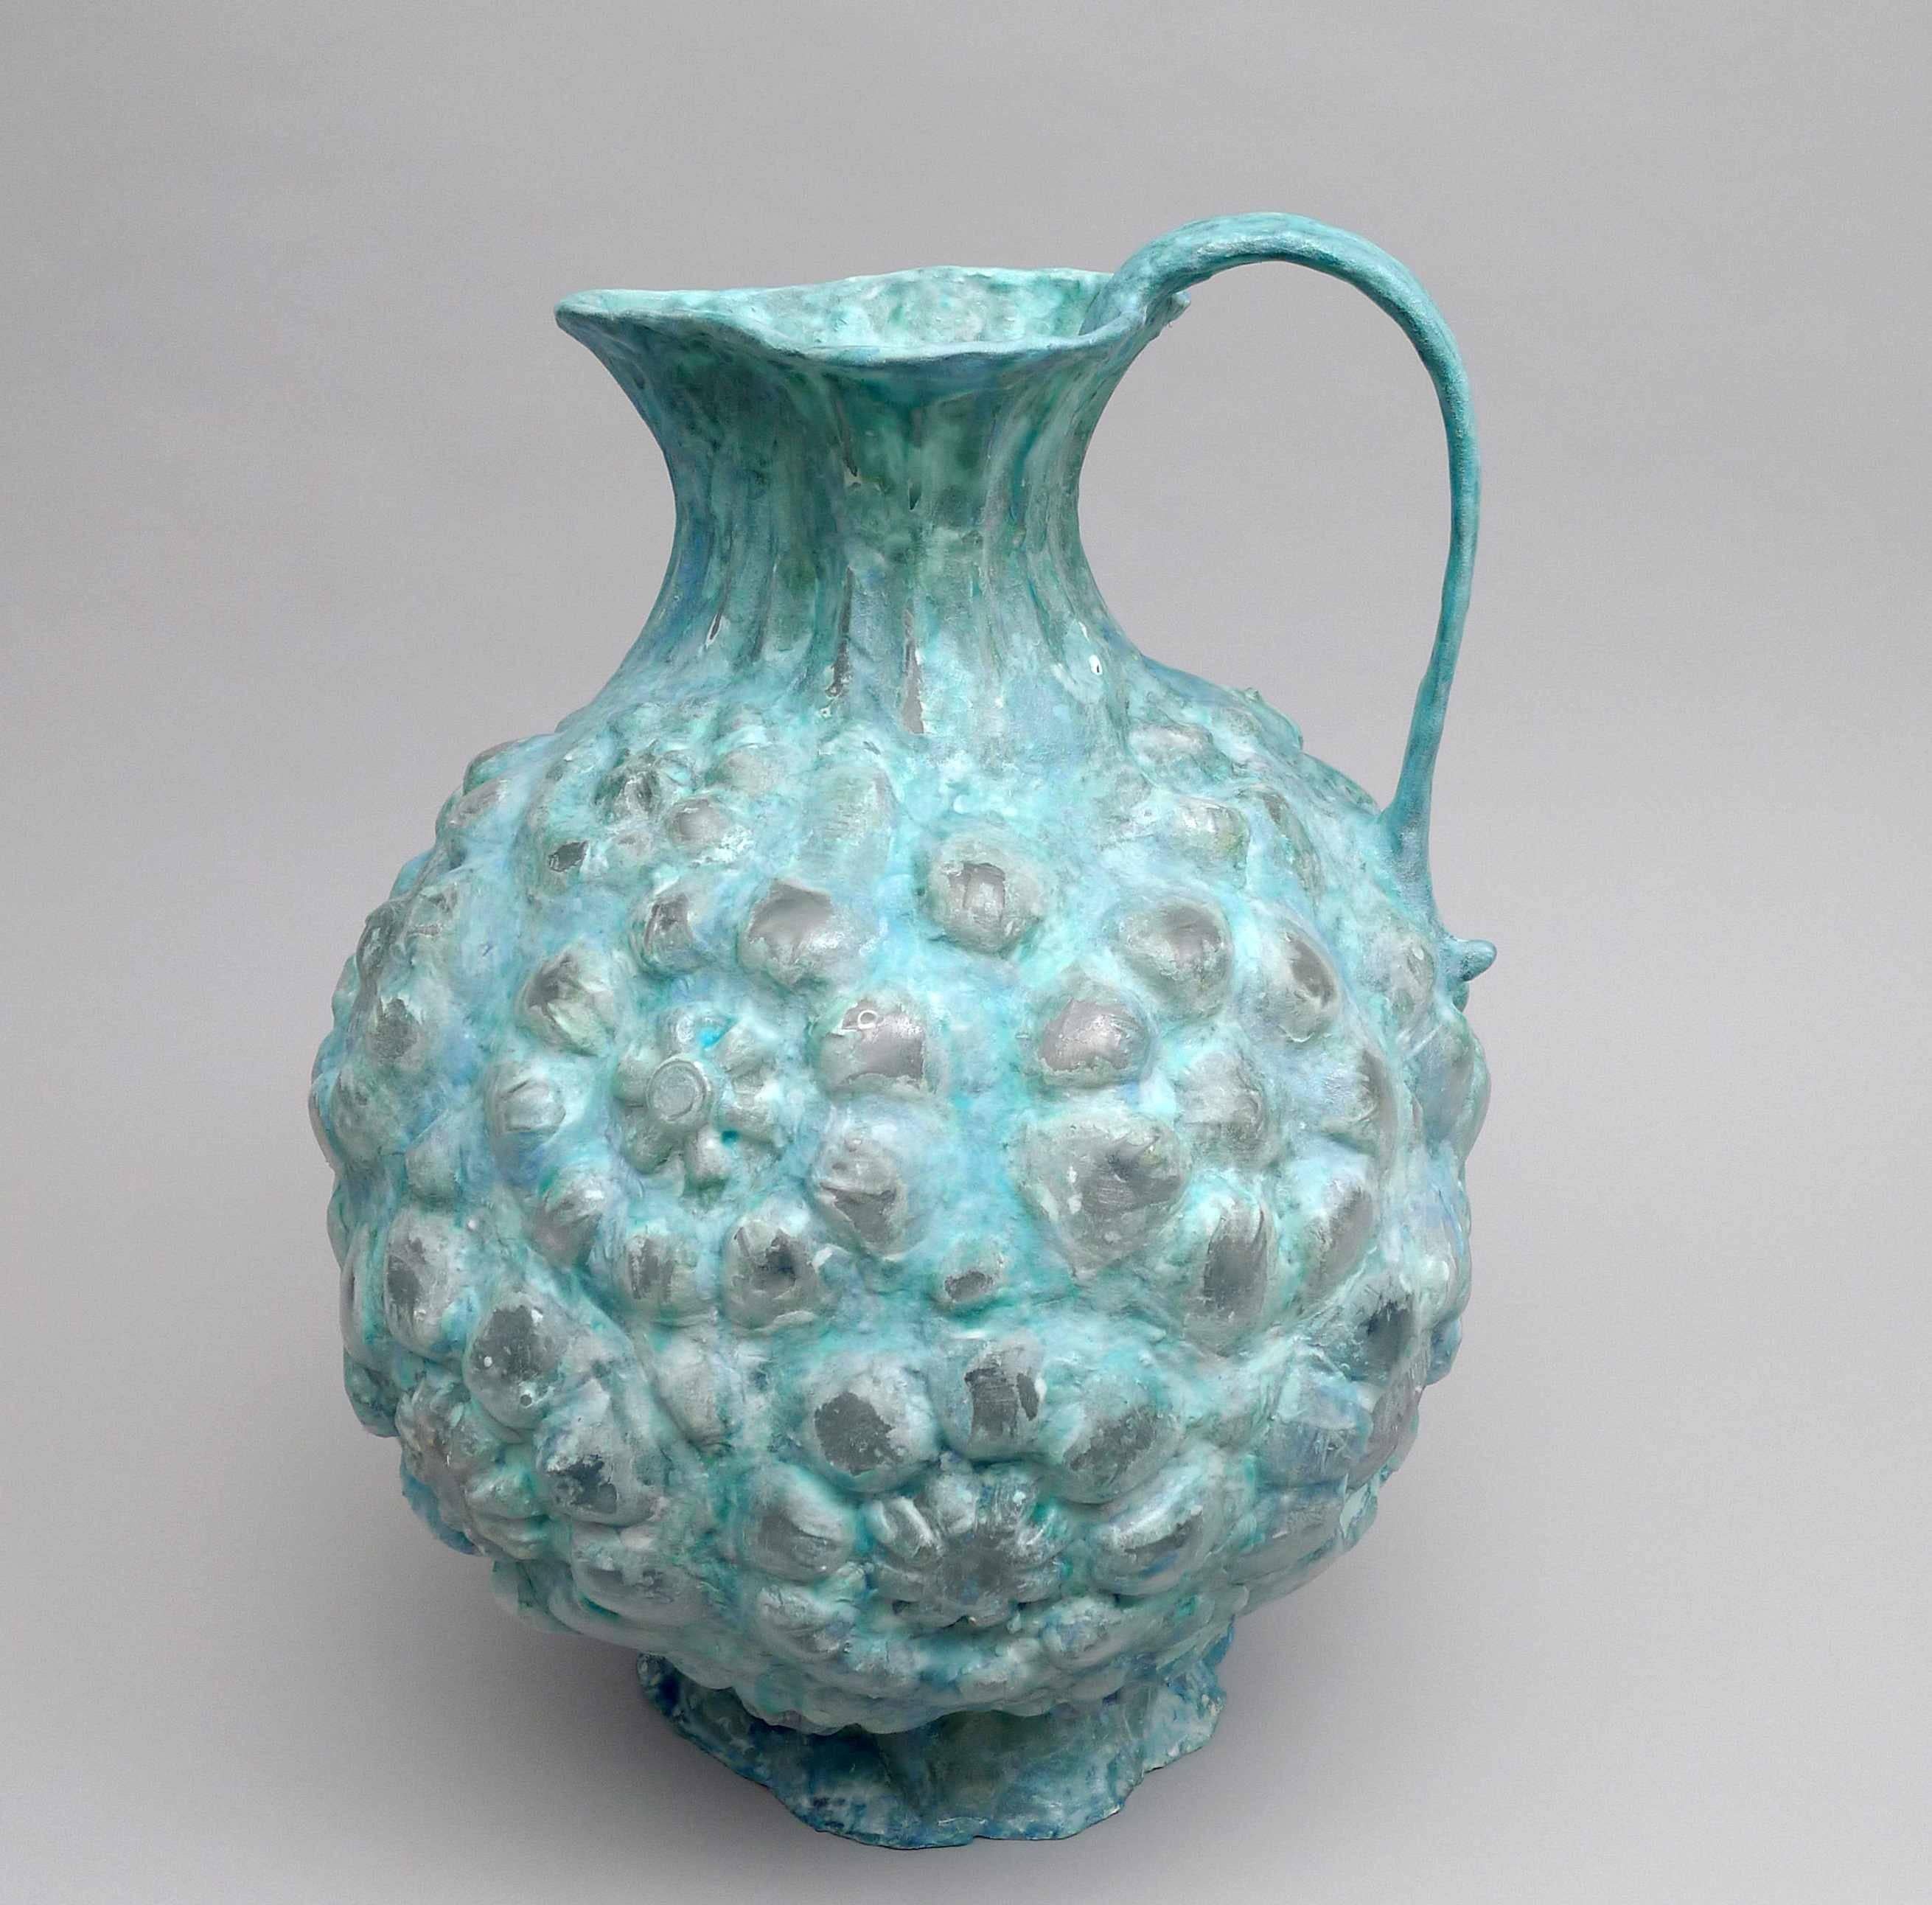 Shari Mendelson makes handmade sculptures that are constructed out of discarded plastic bottles and inspired by ancient vessels. Her interest lies in the balance between emulating the ancient objects that she loves and creating her own original